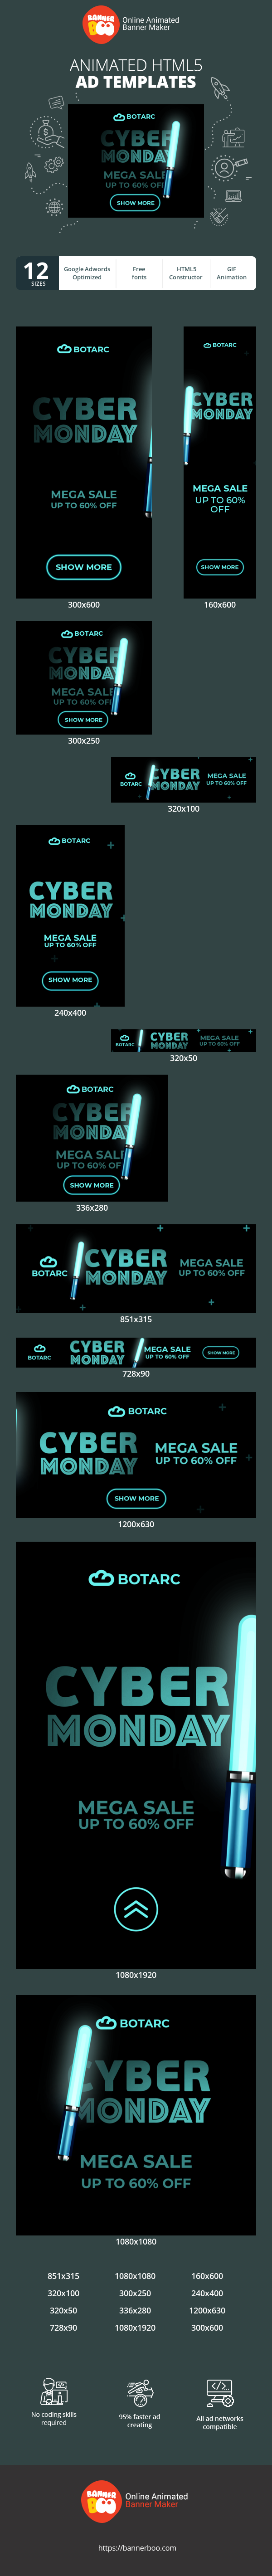 Banner ad template — Cyber Monday — Mega Sale Up To 60% Off